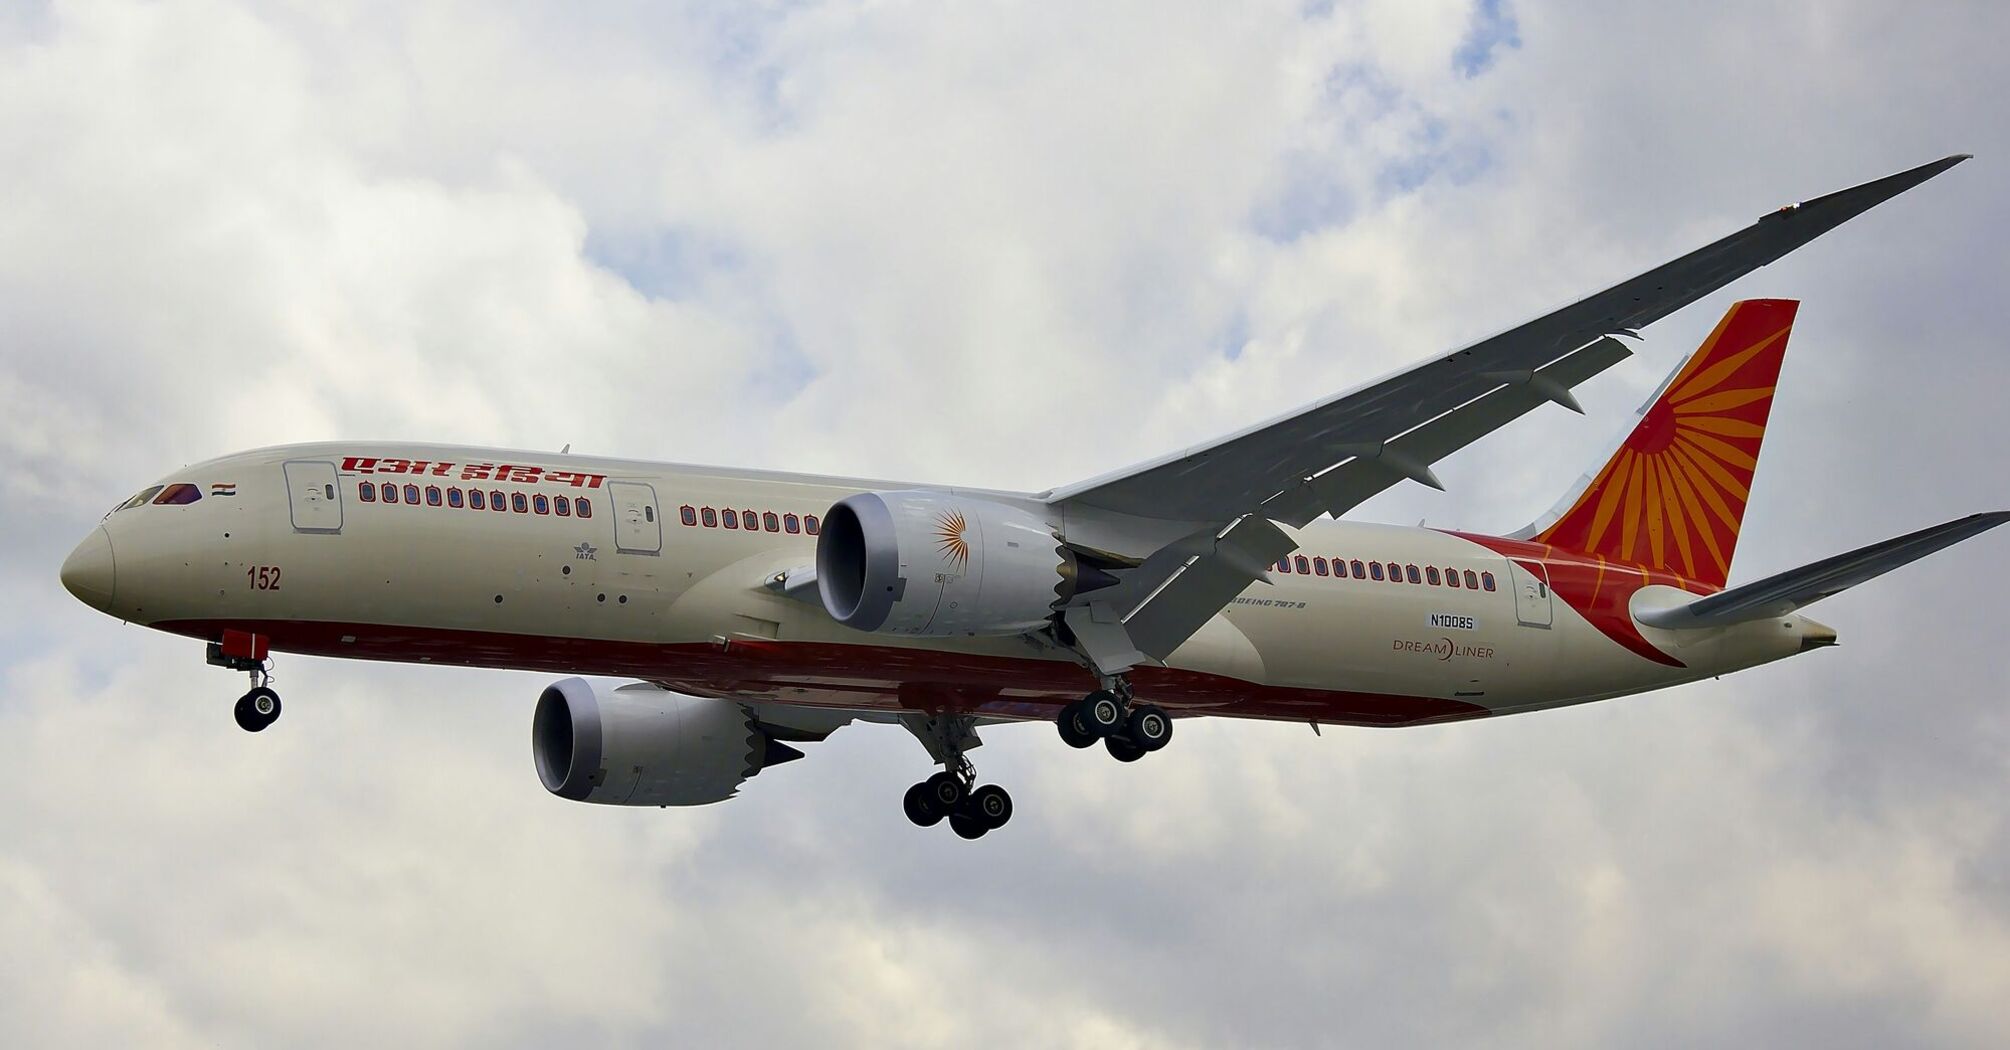 Passenger's death on Air India: DGCA accuses the airline of violating rules